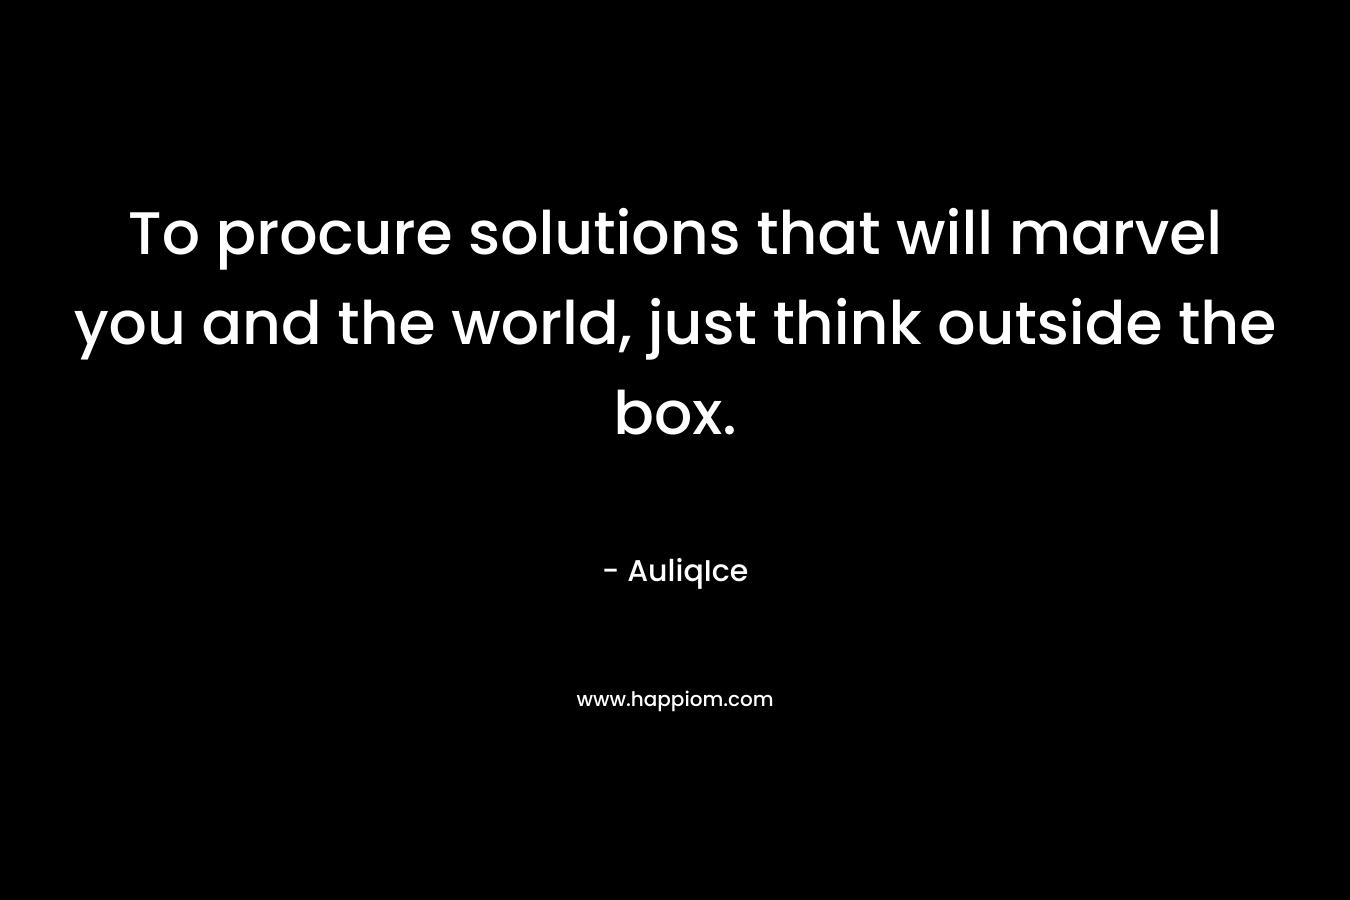 To procure solutions that will marvel you and the world, just think outside the box.